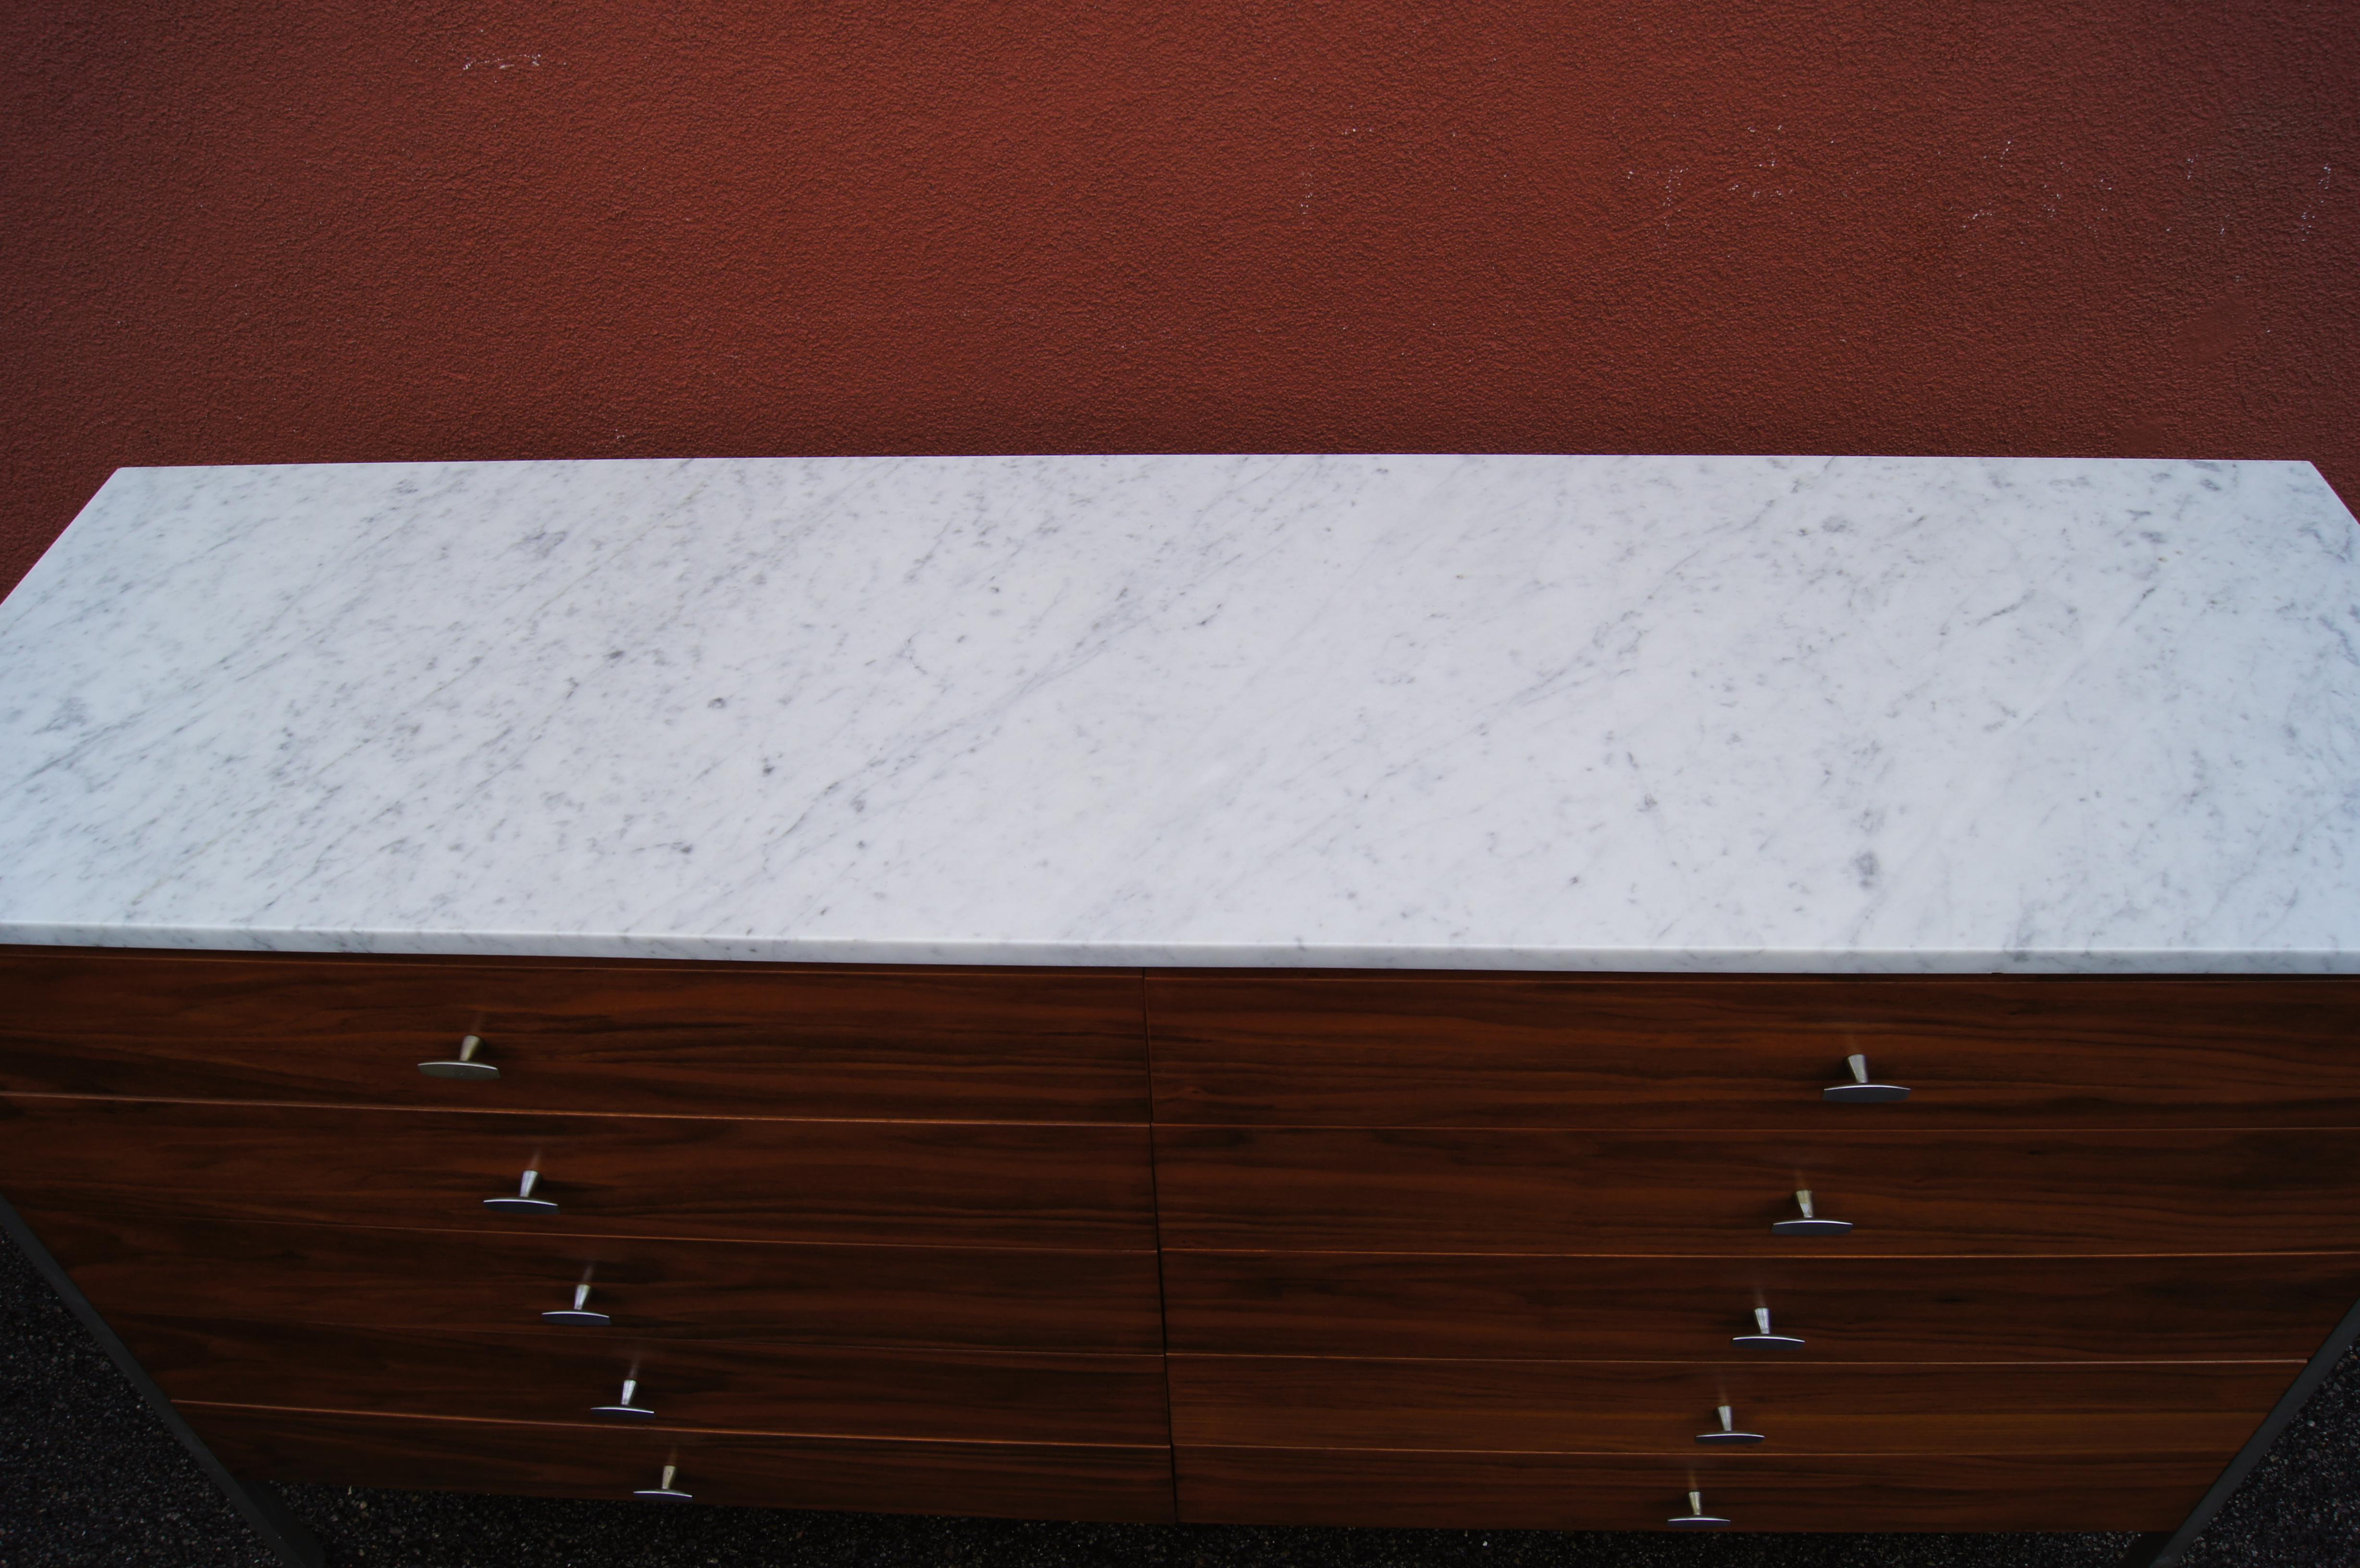 Polished Ten-Drawer Walnut Dresser with Marble Top by Paul McCobb